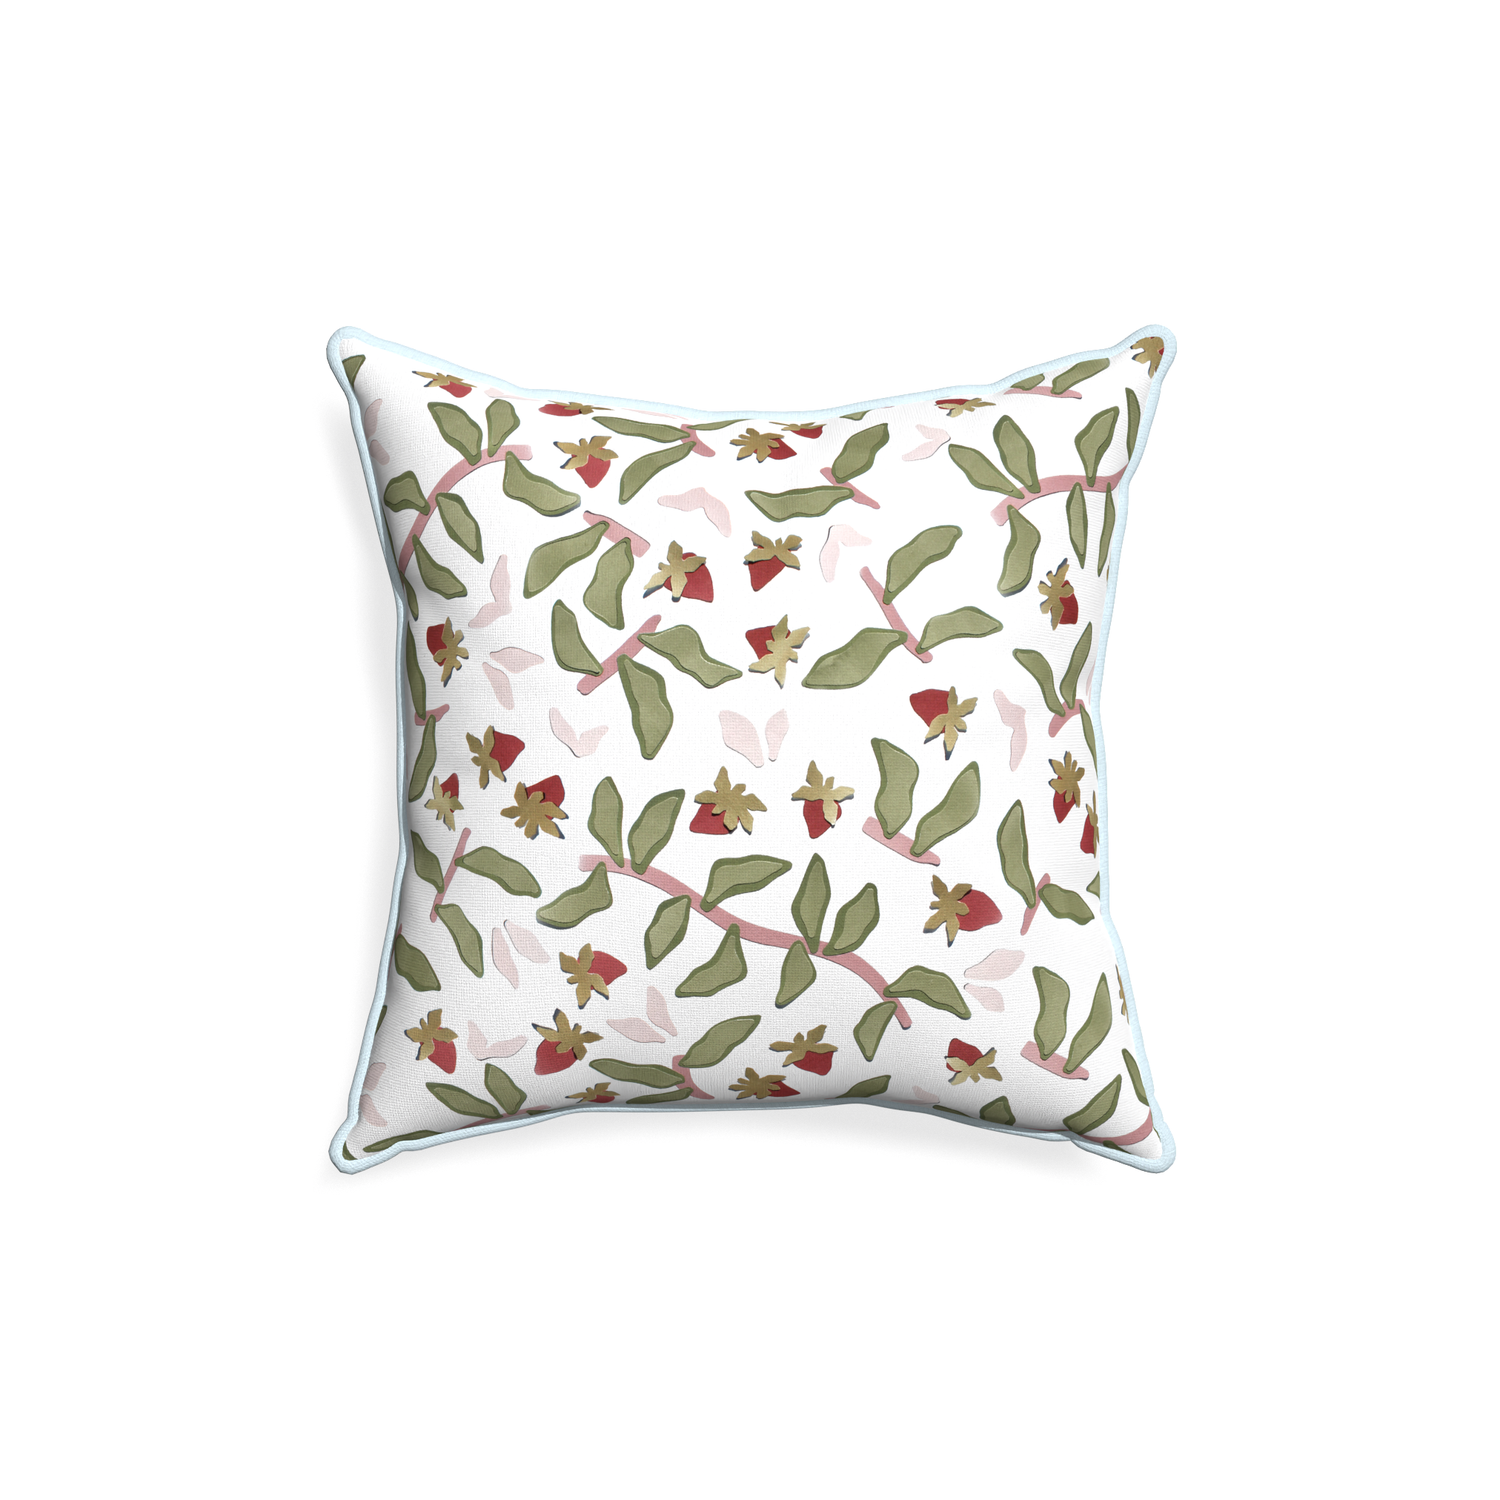 18-square nellie custom strawberry & botanicalpillow with powder piping on white background